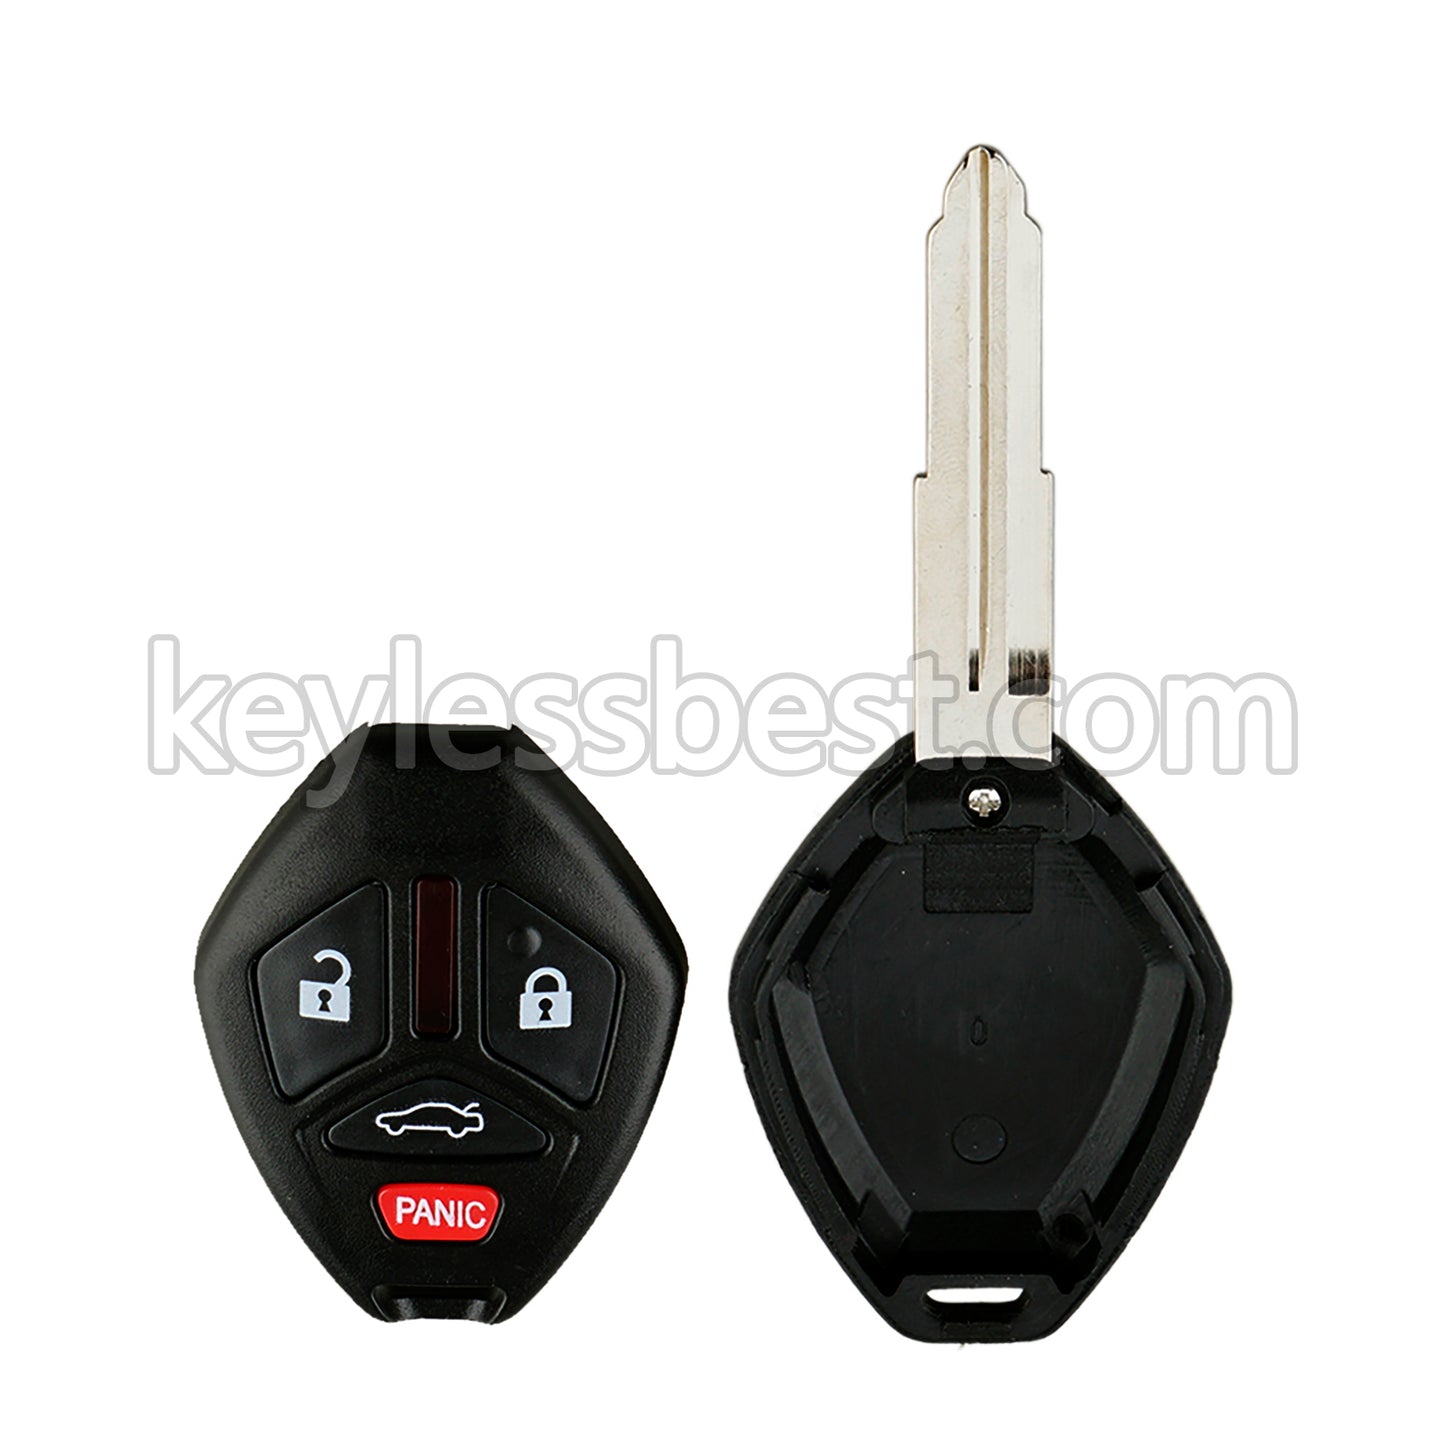 2007 - 2012 Mitsubishi Eclipse Galant / 4 Buttons Remote Key / OUCG8D-620M-A / 315MHz